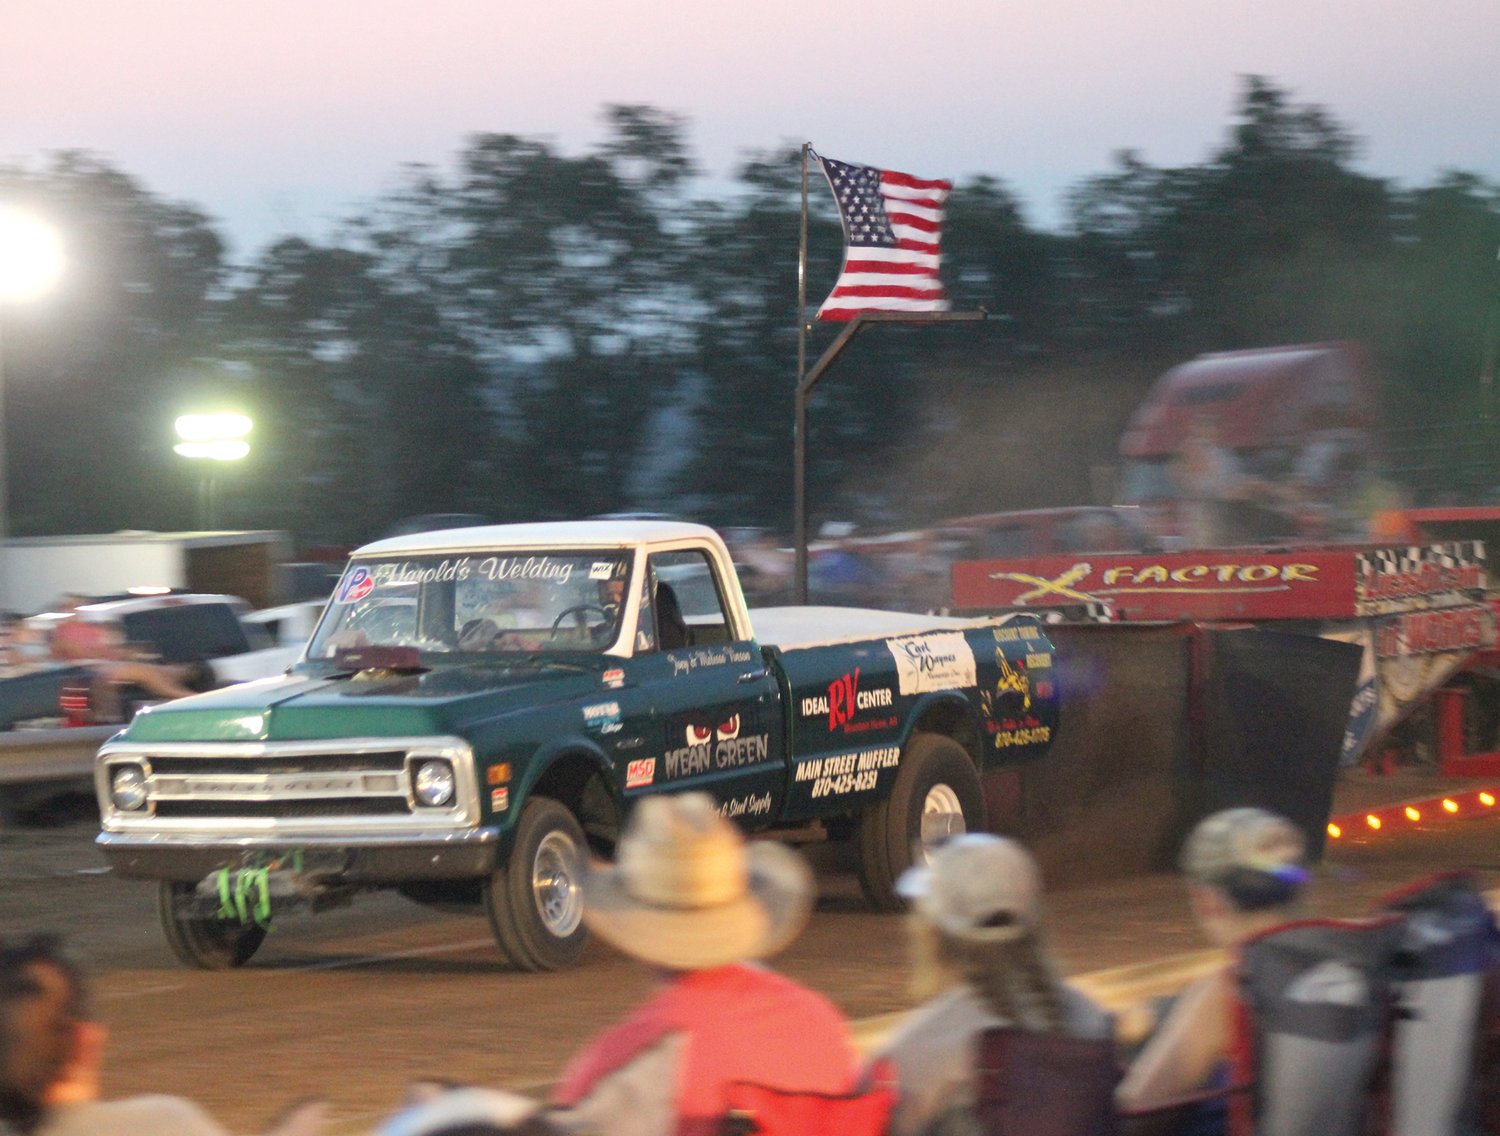 A truck named “Mean Green” pulls the sled down the course during the Truck and Tractor Pull event held at the Hartville Lions Club Arena on Saturday, Aug. 8.